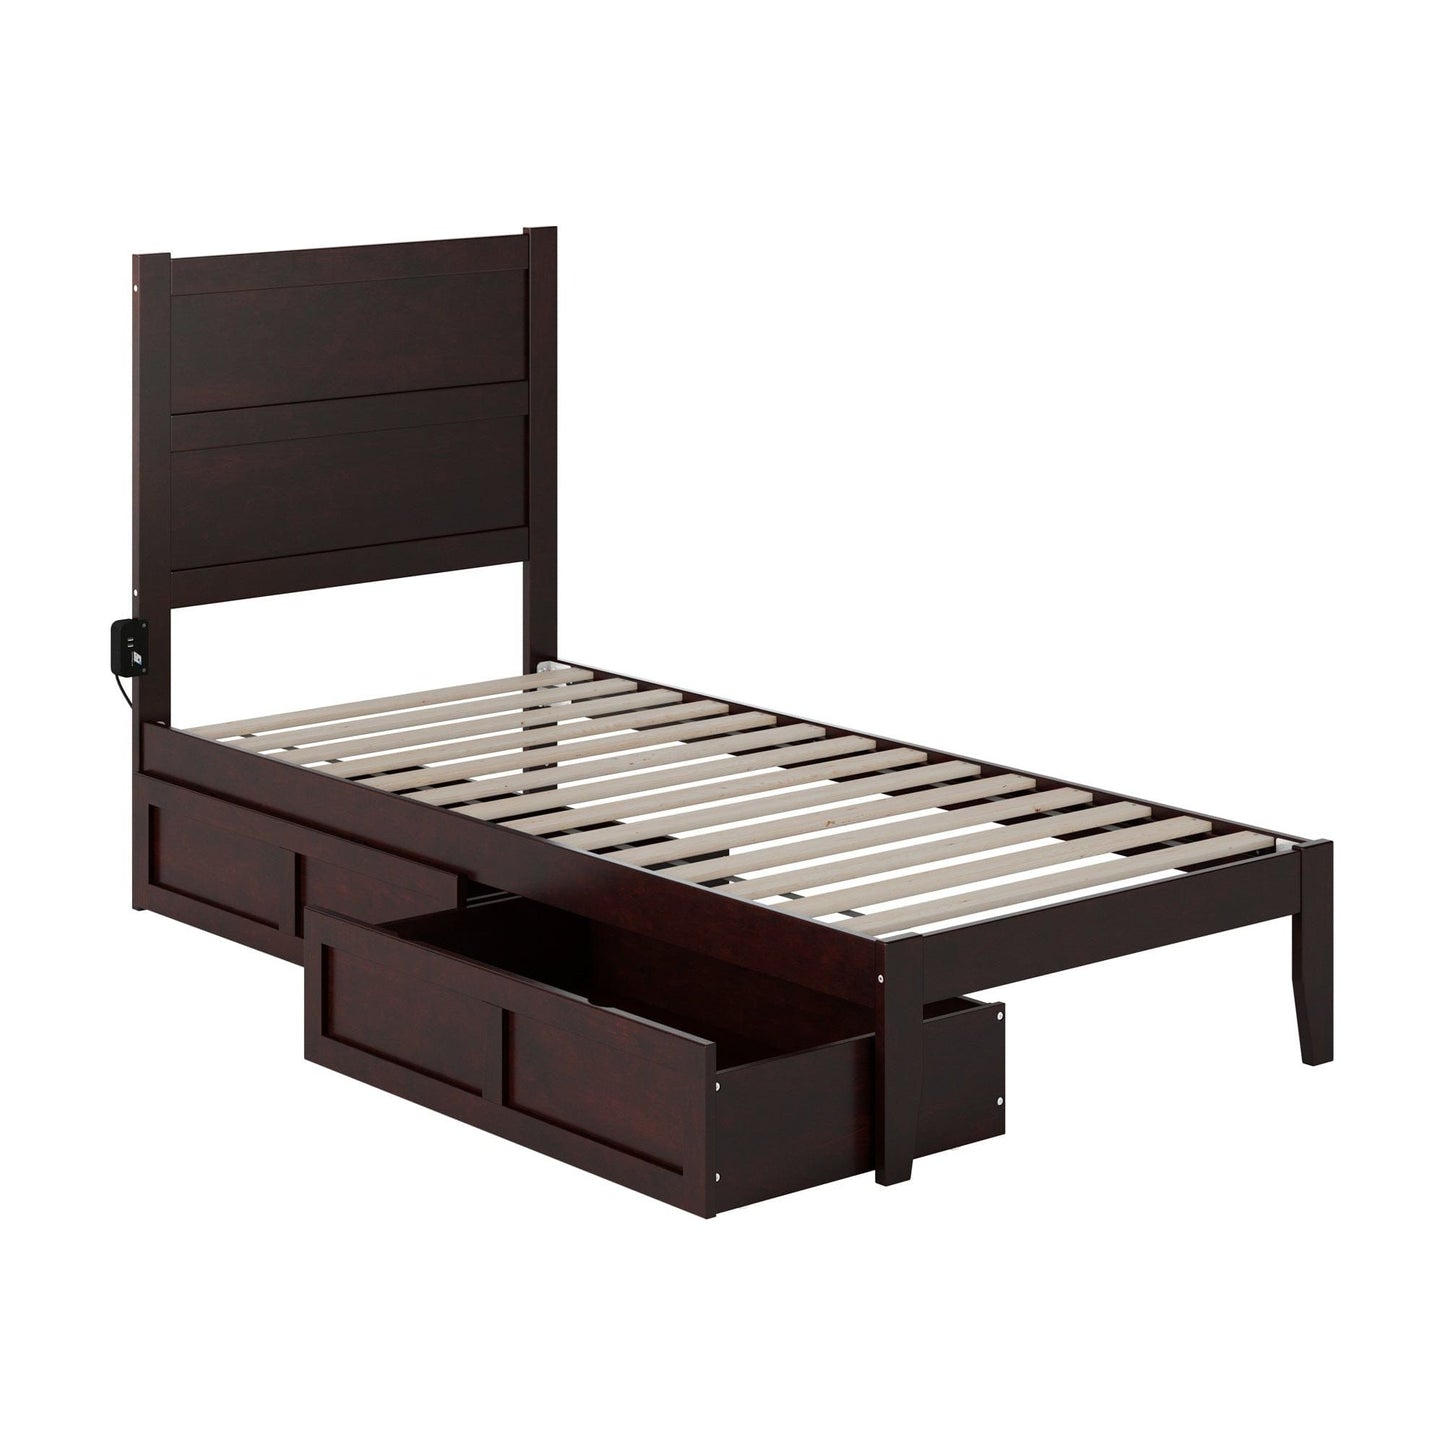 AFI Furnishings NoHo Twin Extra Long Bed with 2 Drawers in Espresso AG9113411